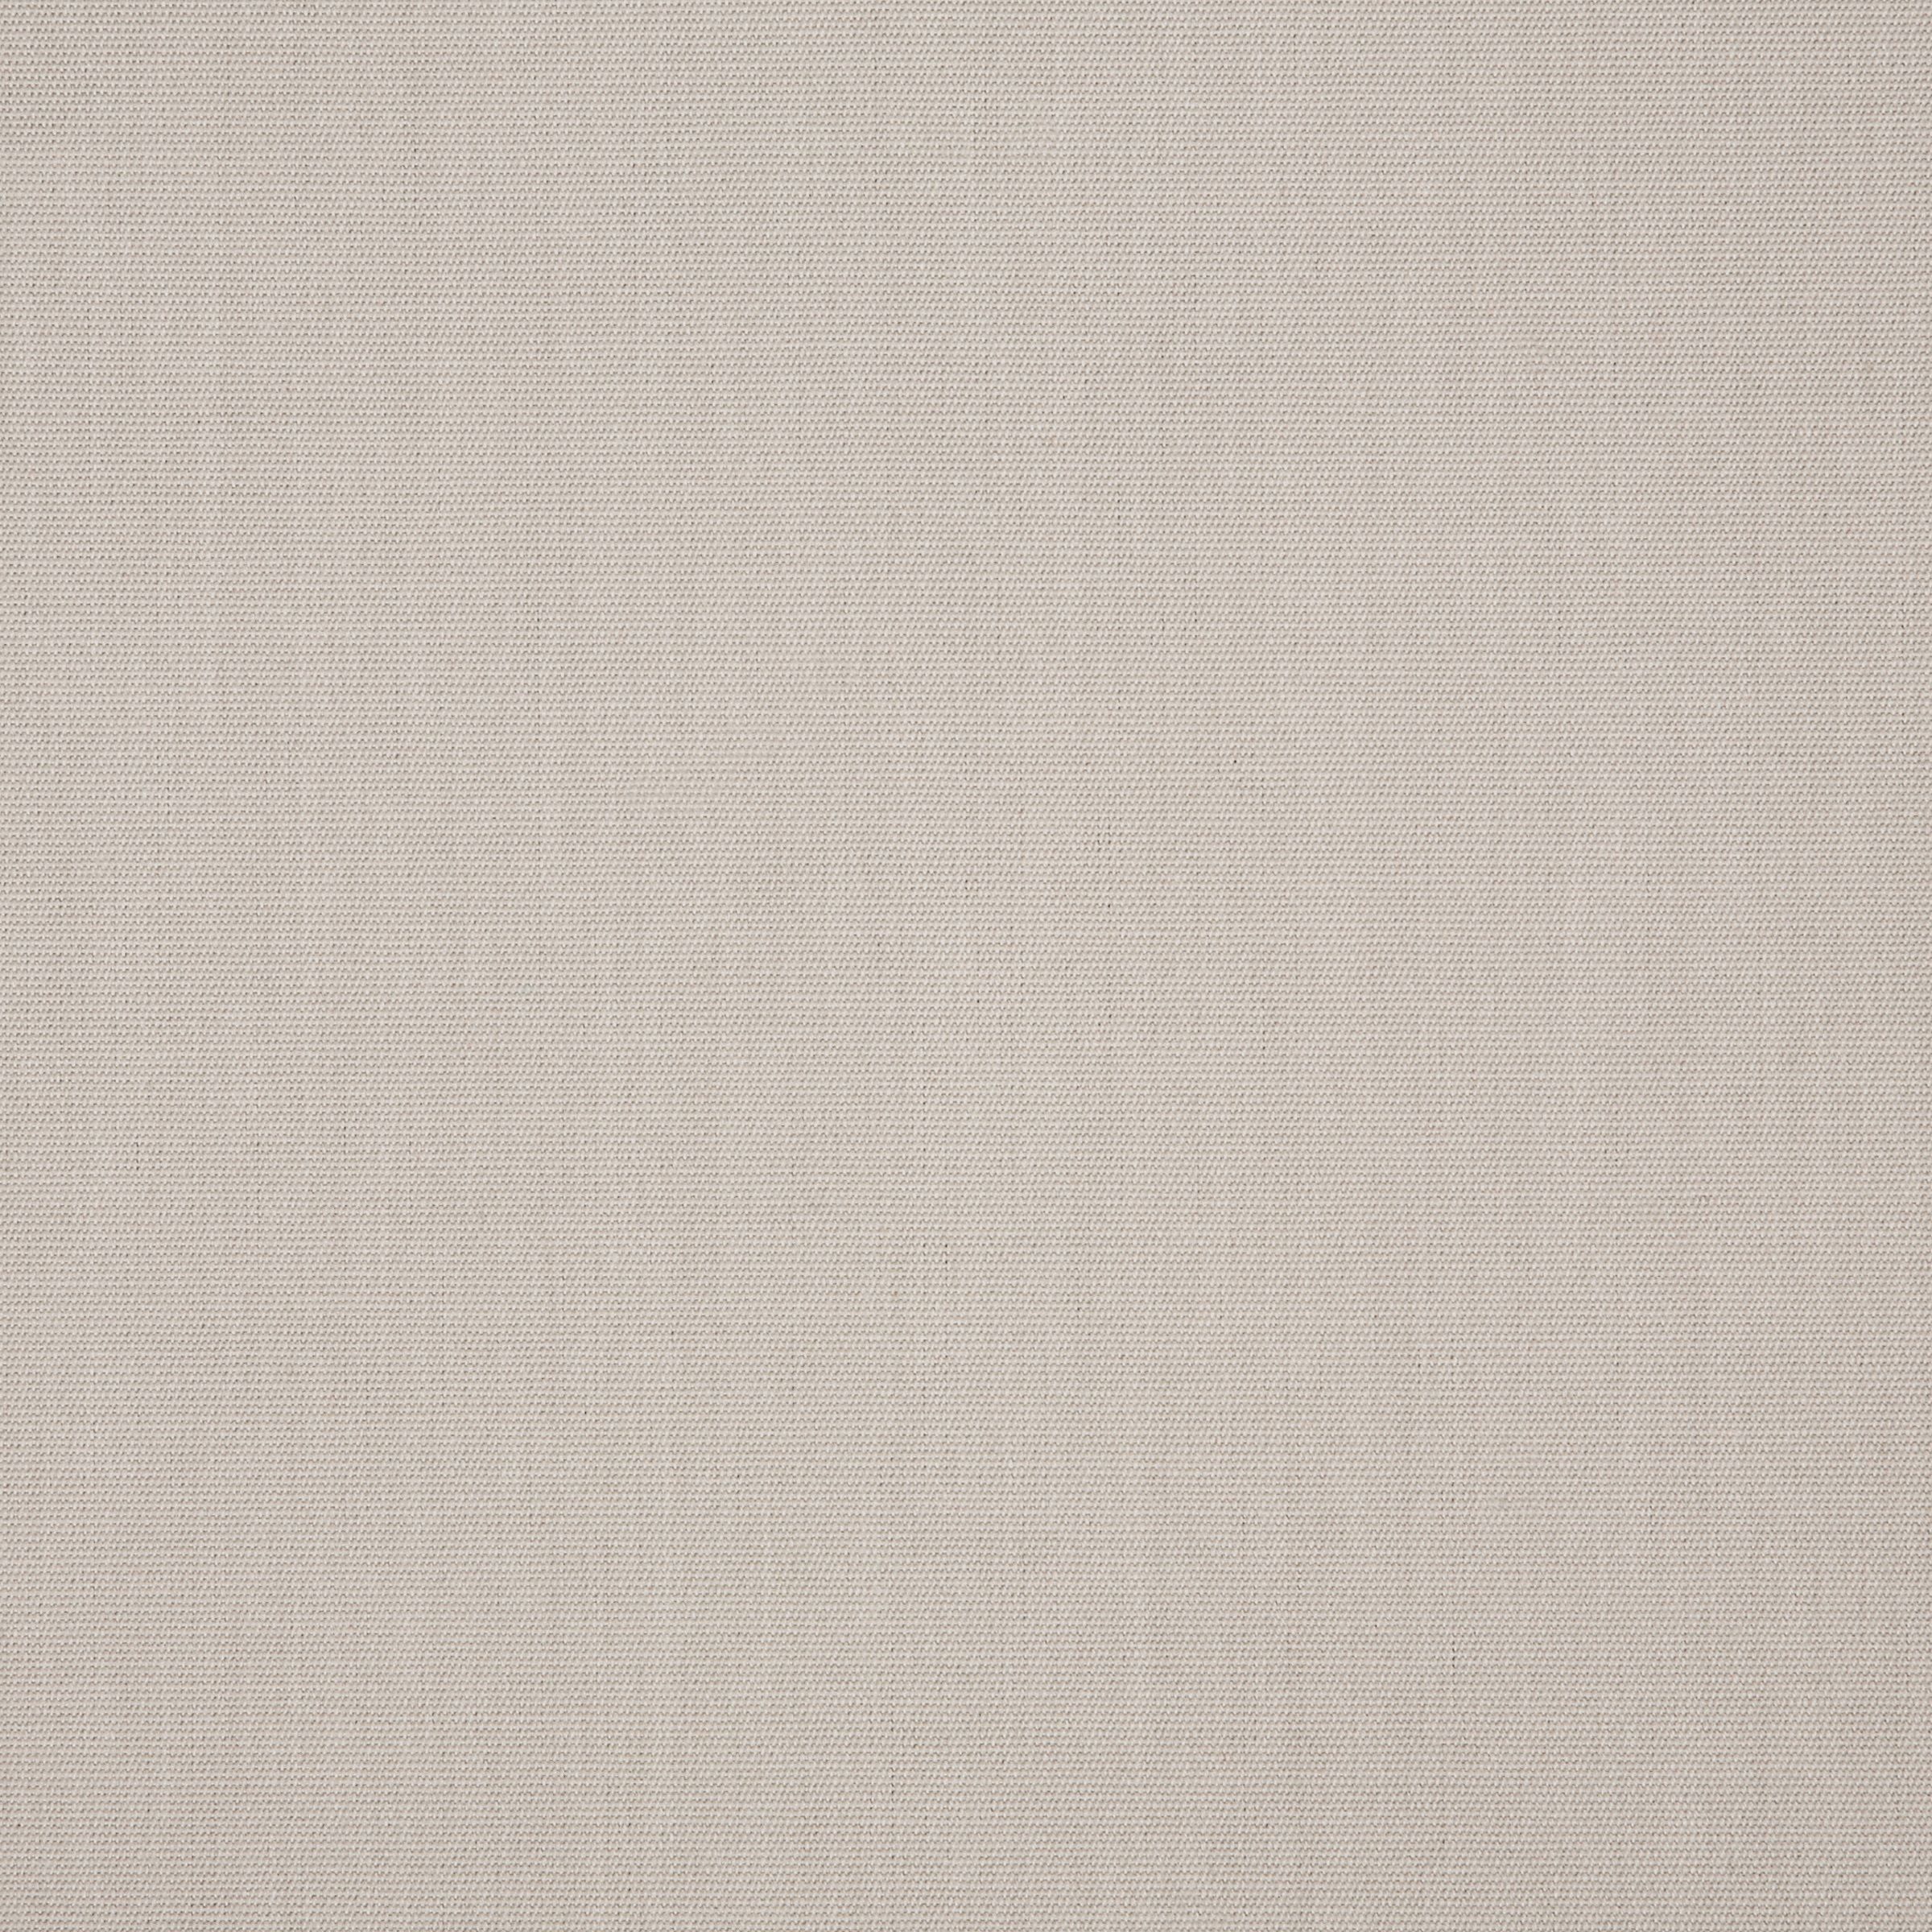 Fabric Color A – Cloud 57012 Swatch